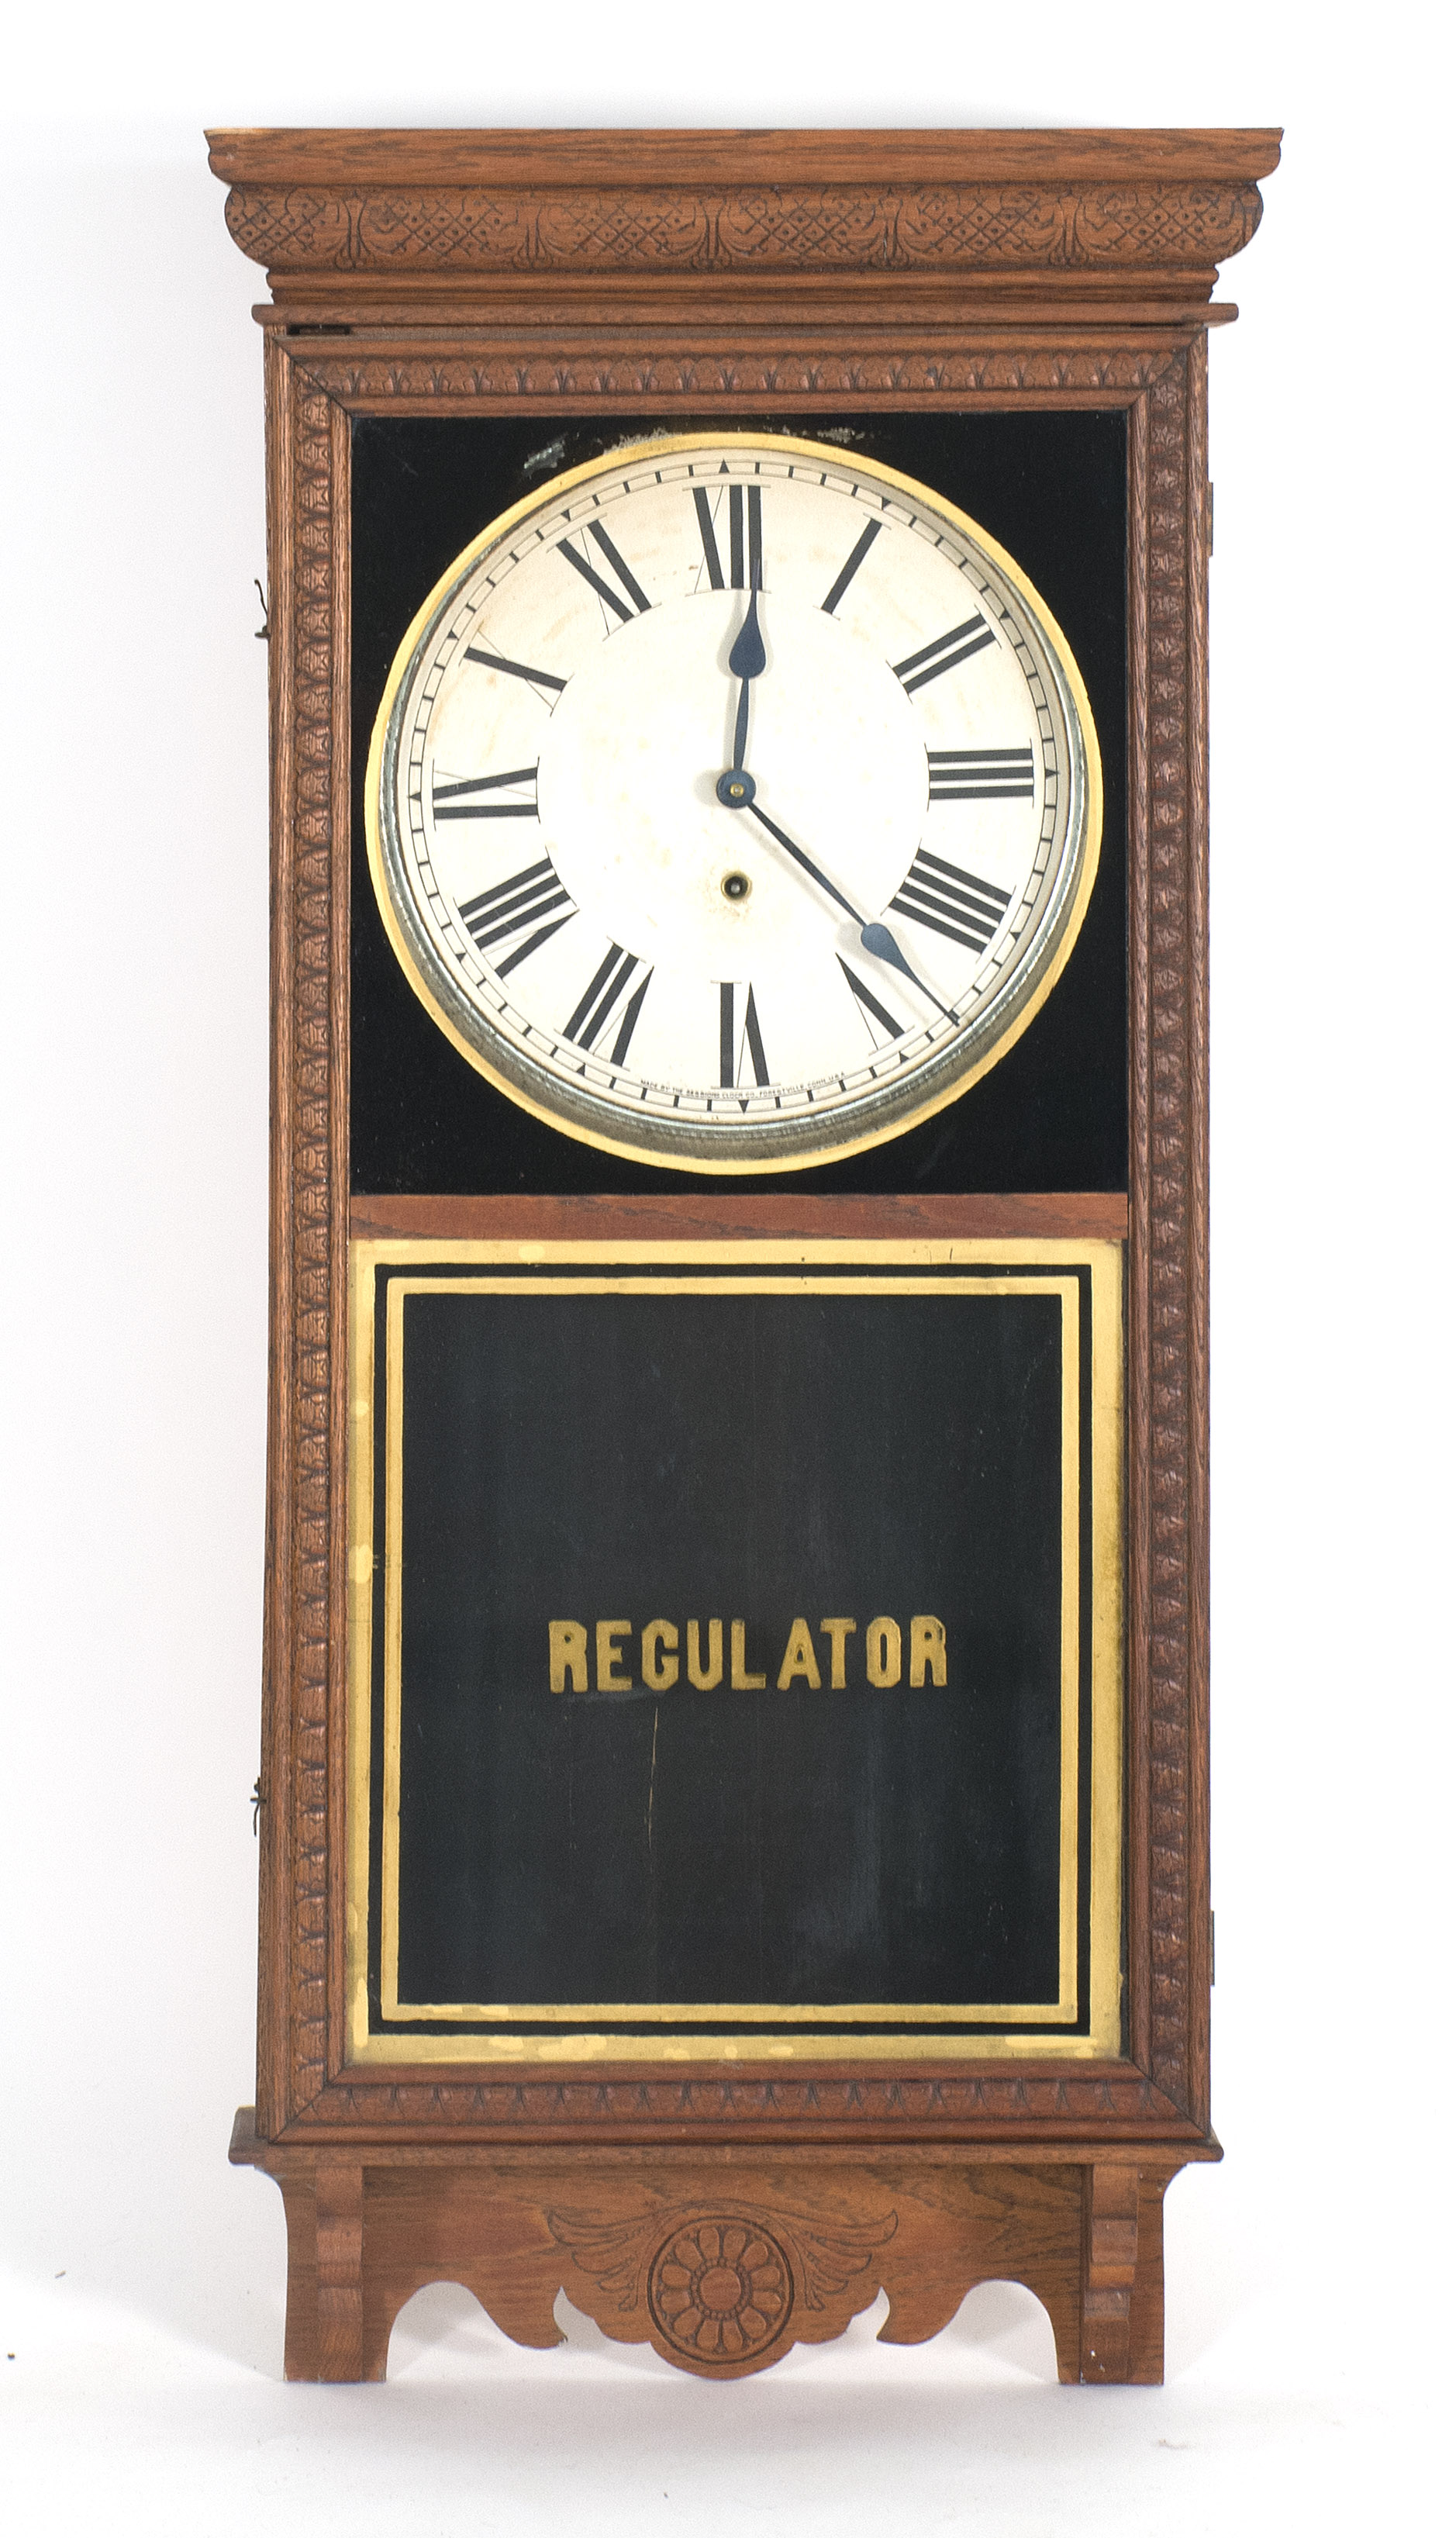 Sessions Regulator Wall Clock By